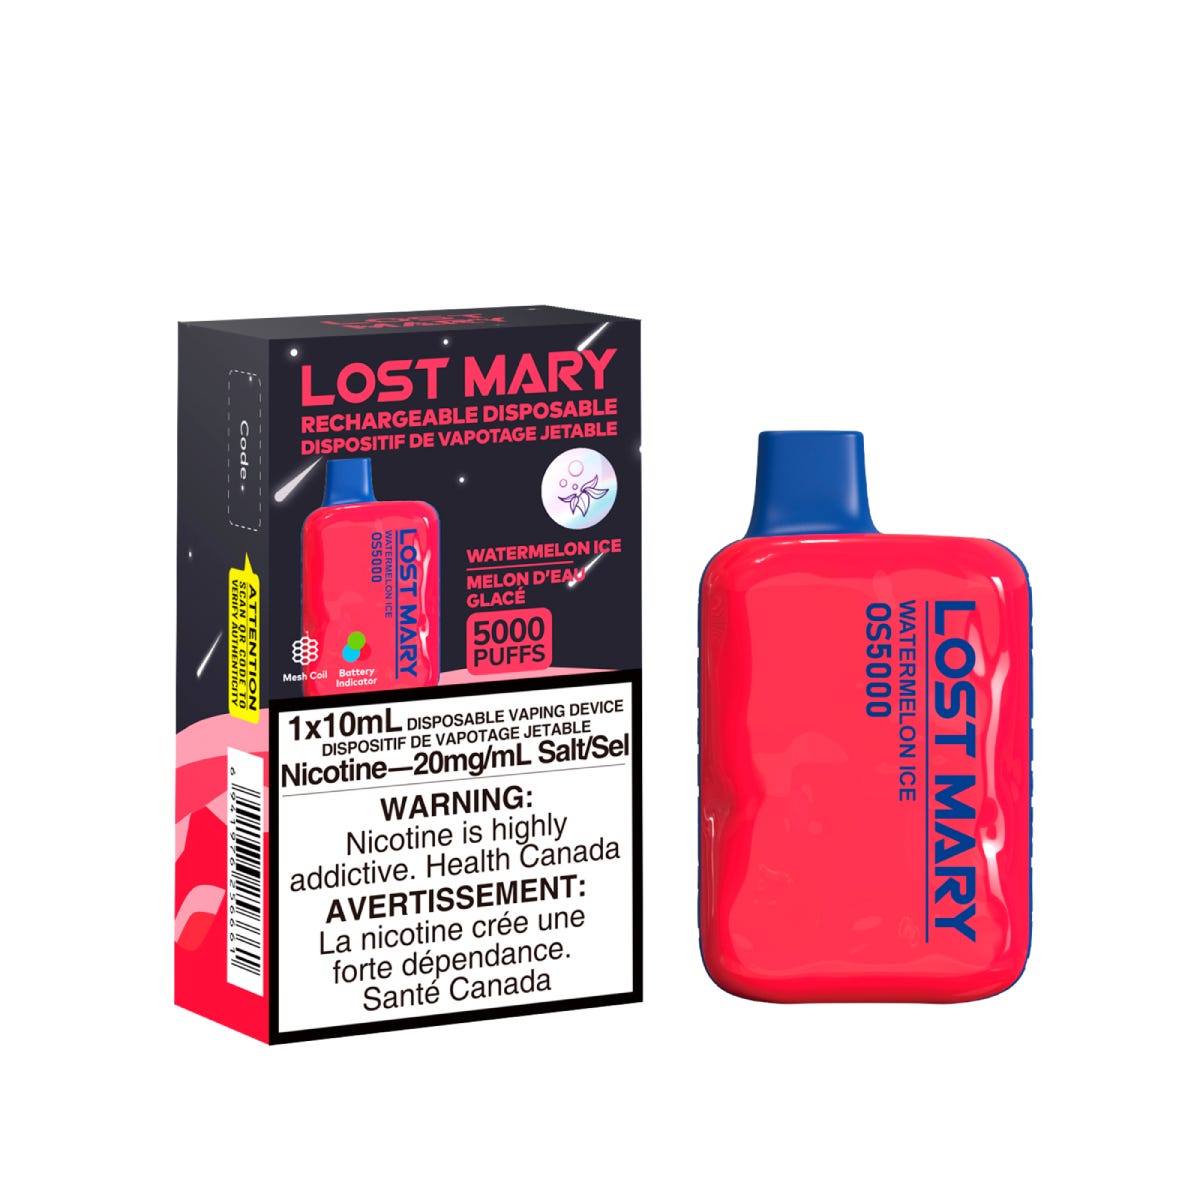 LostMary OS5000 - Rechargeable Disposable - 5000 puffs